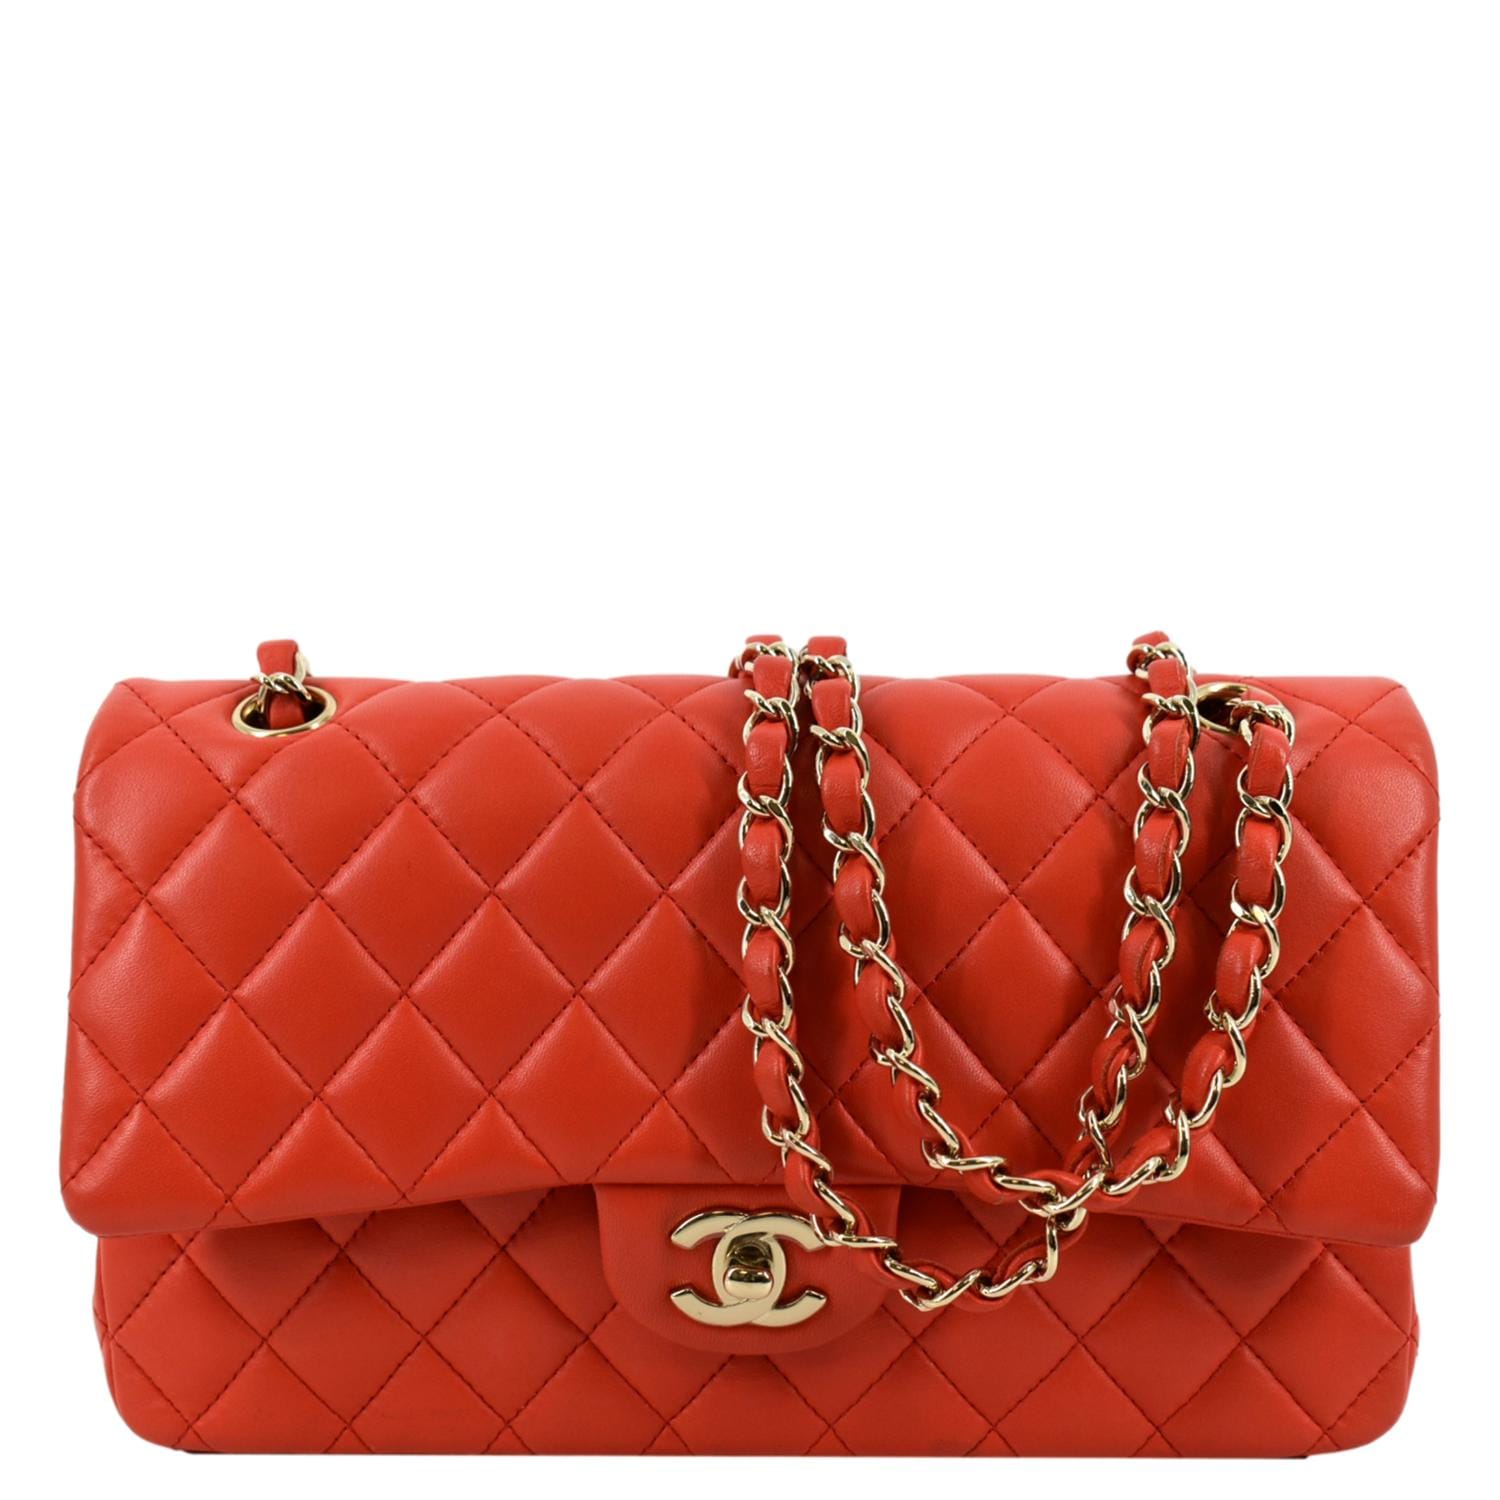 CHANEL CC Quilted Double Chain Shoulder Bag Purse Red Nylon 56465